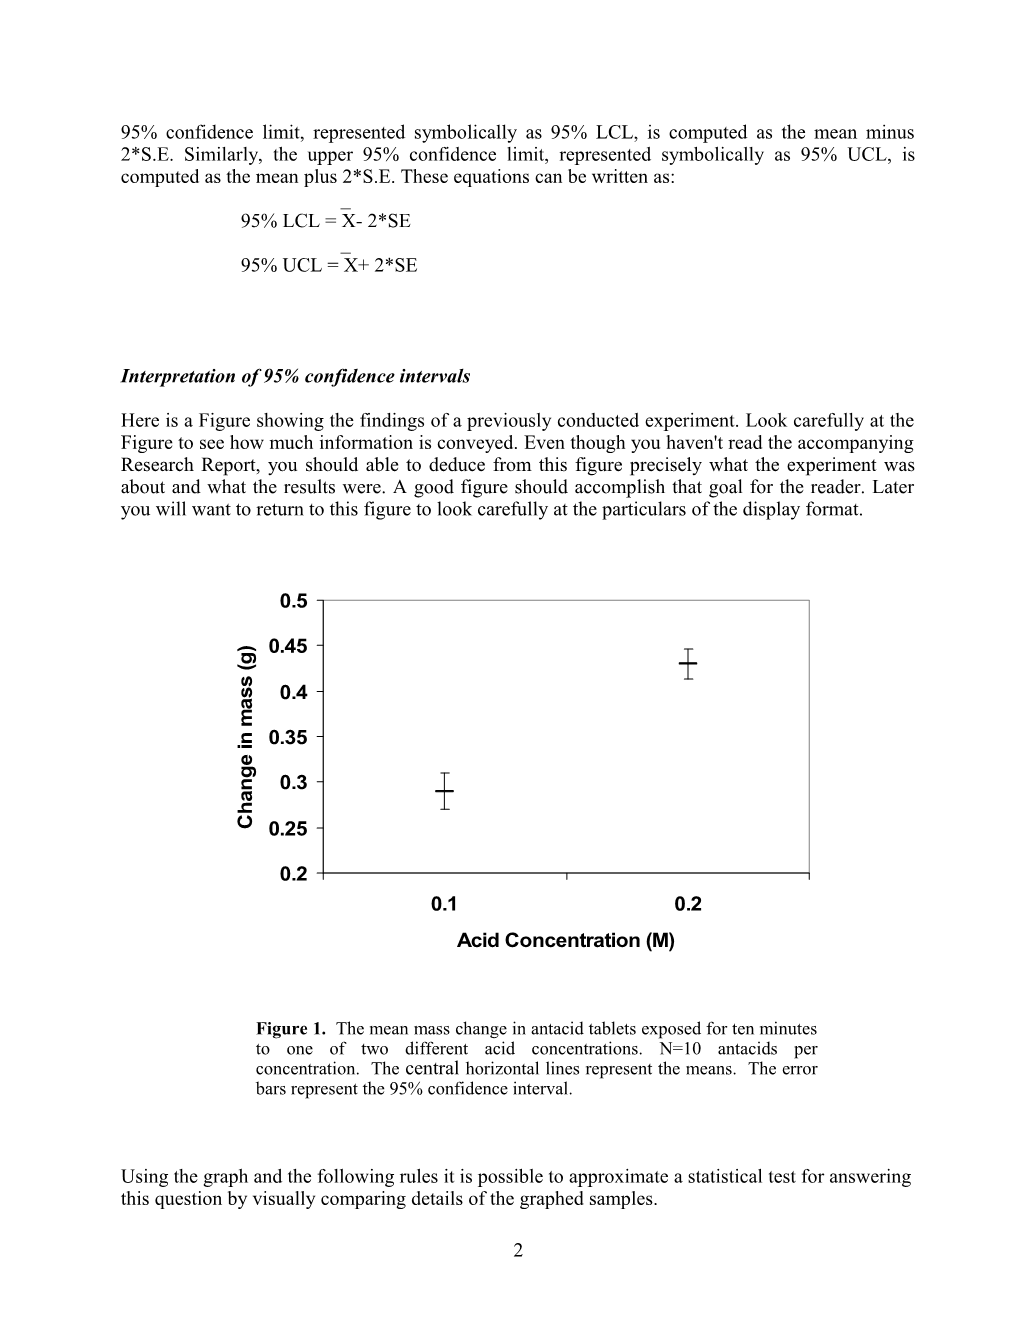 LAB EXERCISE: Statistical Analysis (Calculating 95% Confidence Intervals)